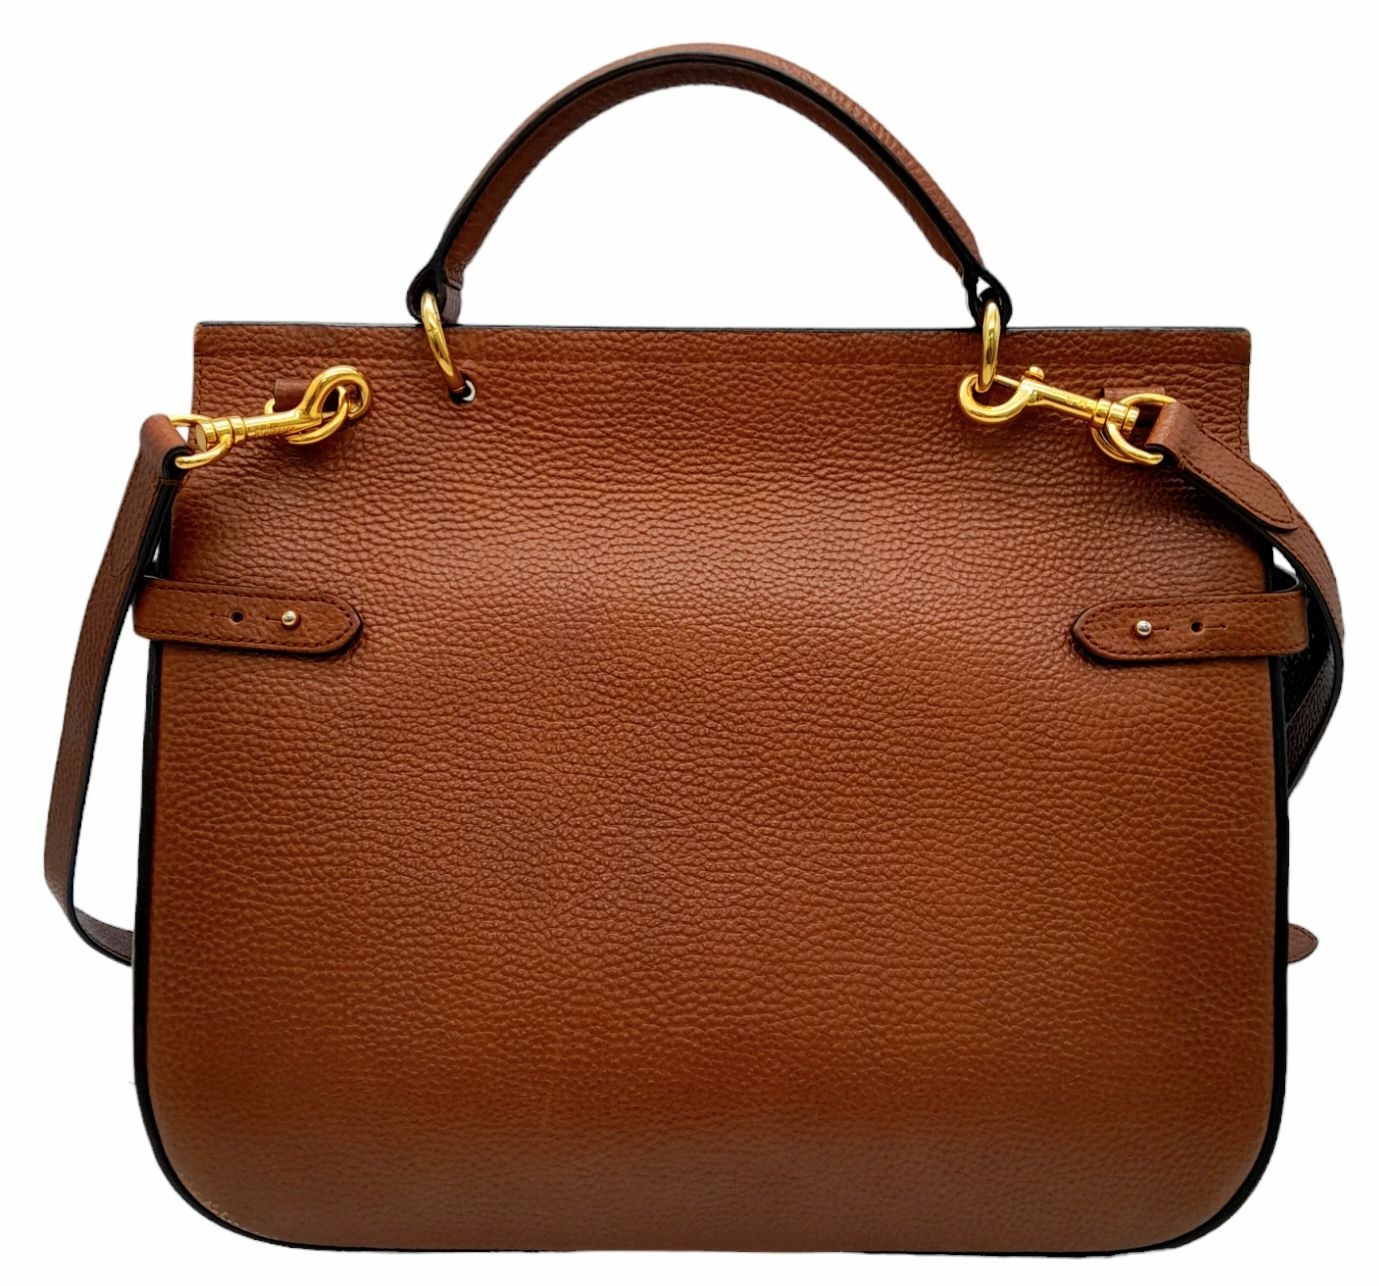 A Mulberry Amberley Satchel Handbag. Brown leather exterior with gold tone hardware. Flap-over front - Image 2 of 14